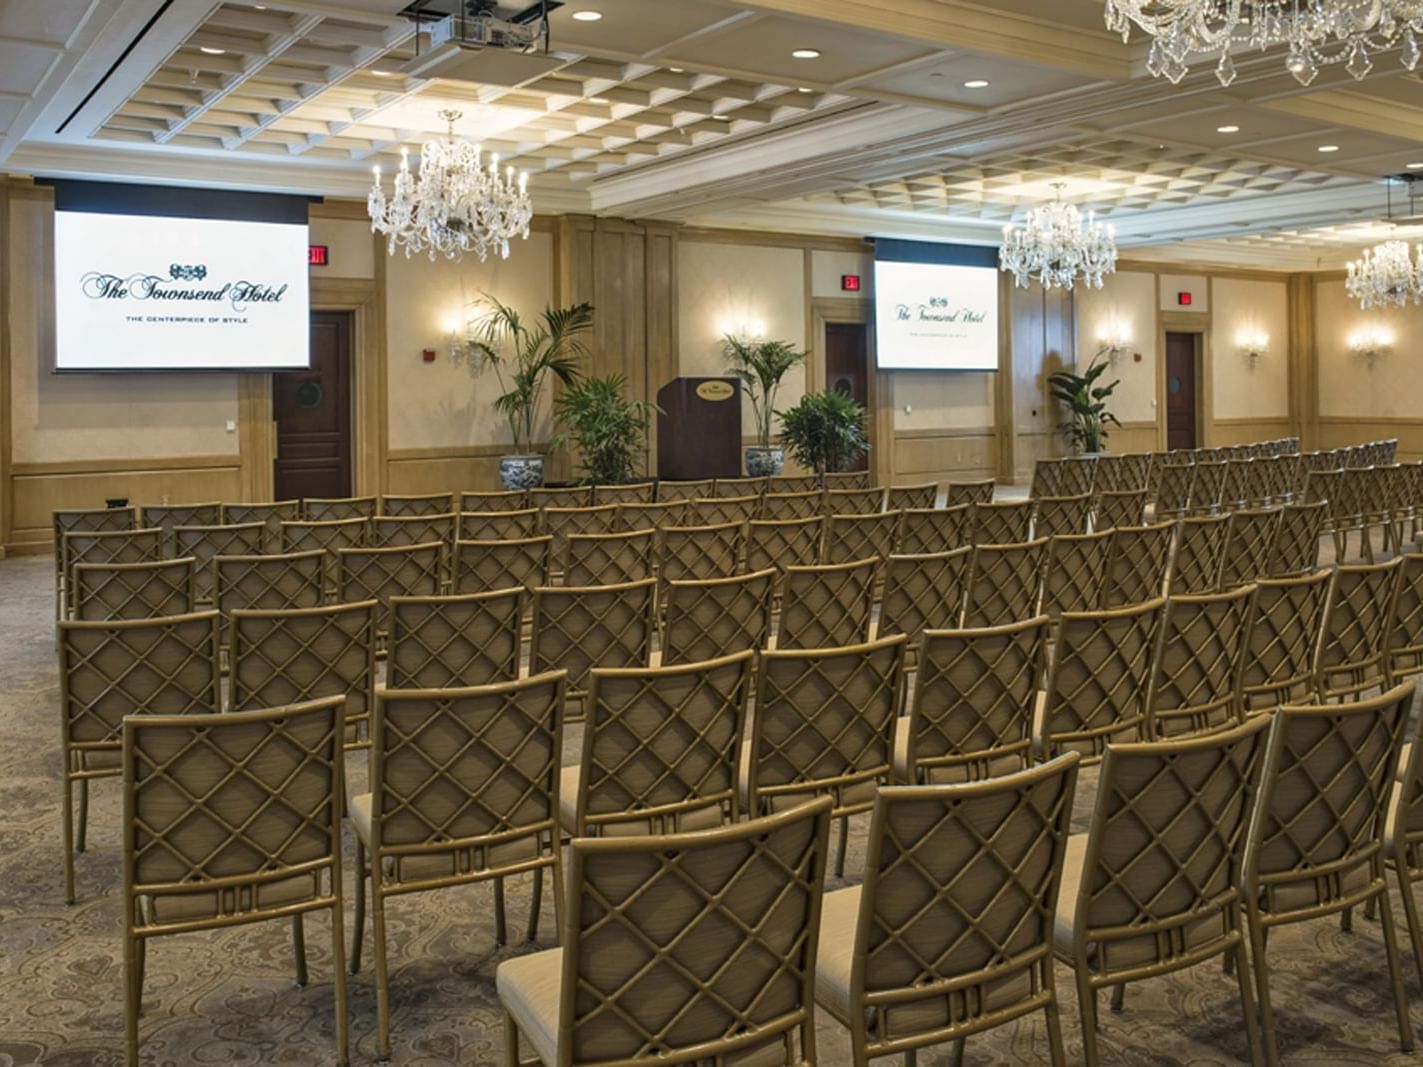 rows of chairs in a hotel event room